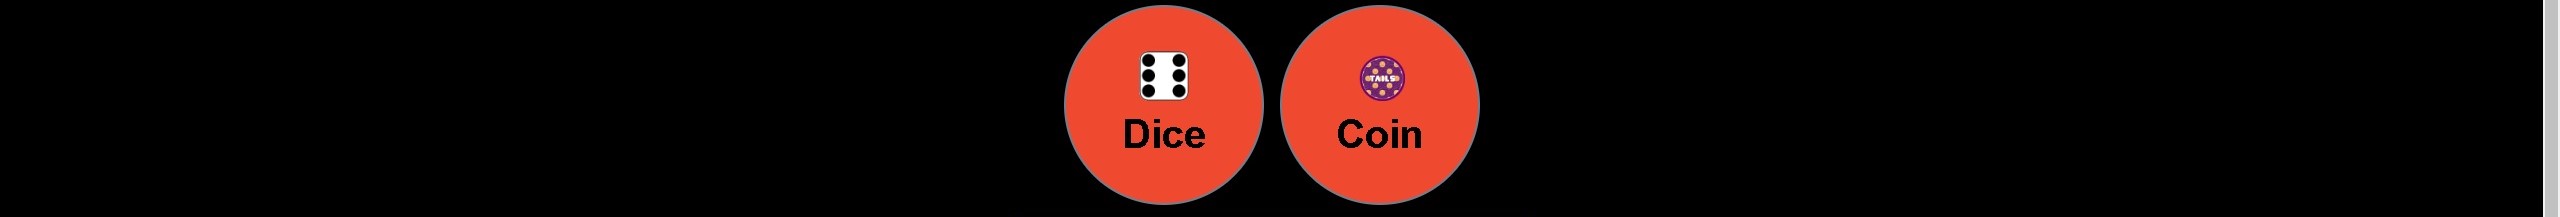 picture of dice and coin buttons